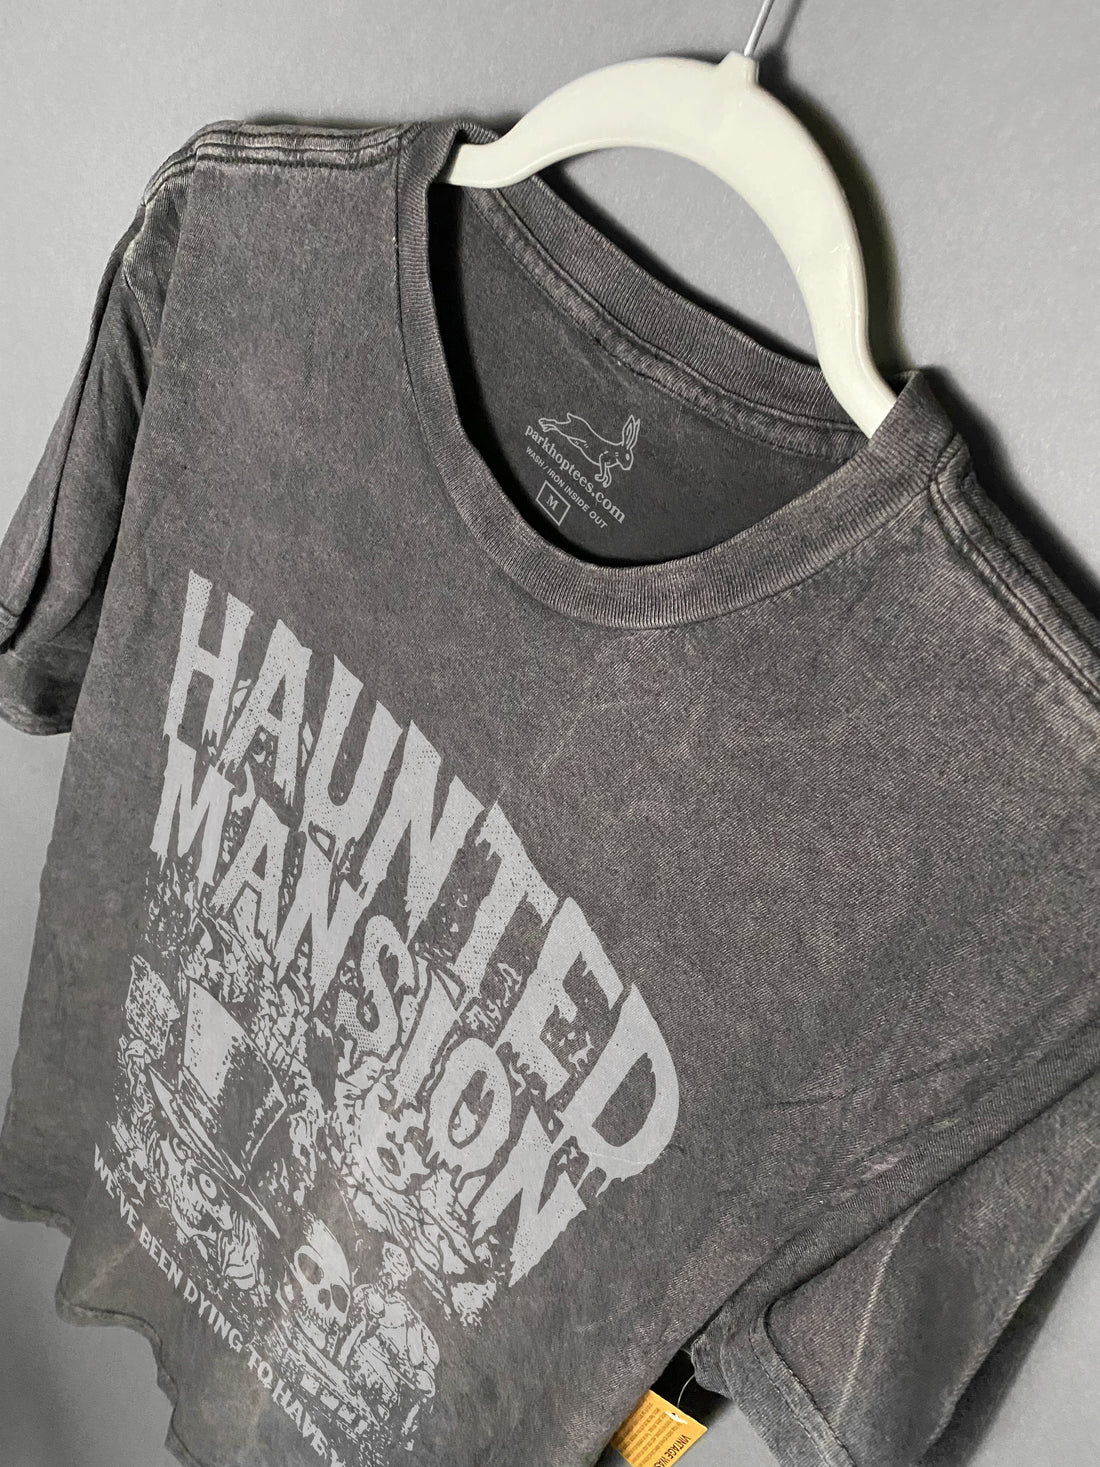 This vintage haunted mansion tee was screen printed in California by park hop tees at parkhoptees.com